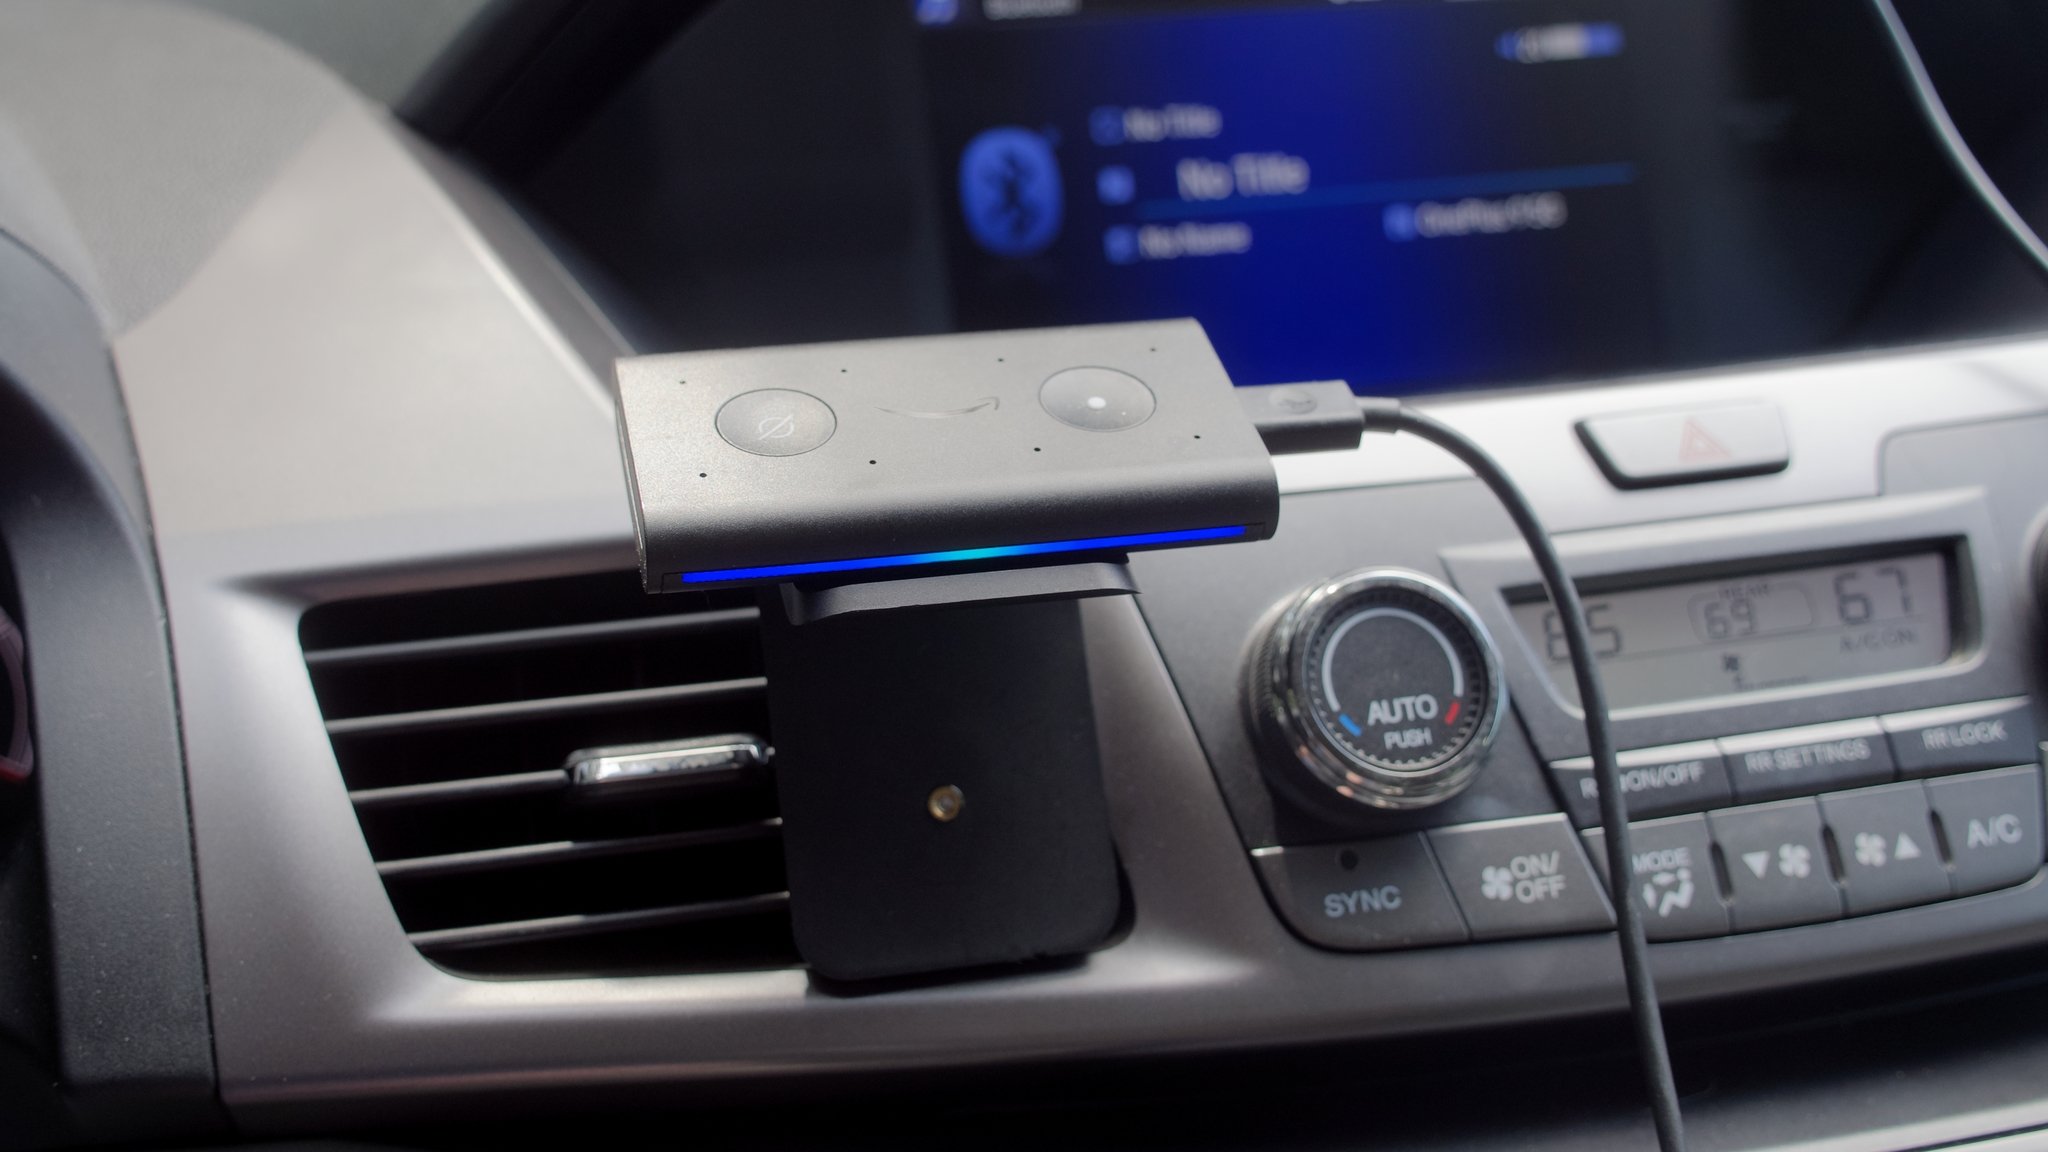 Smart Car on a Budget: 's Echo Auto Adds Alexa to Your Car